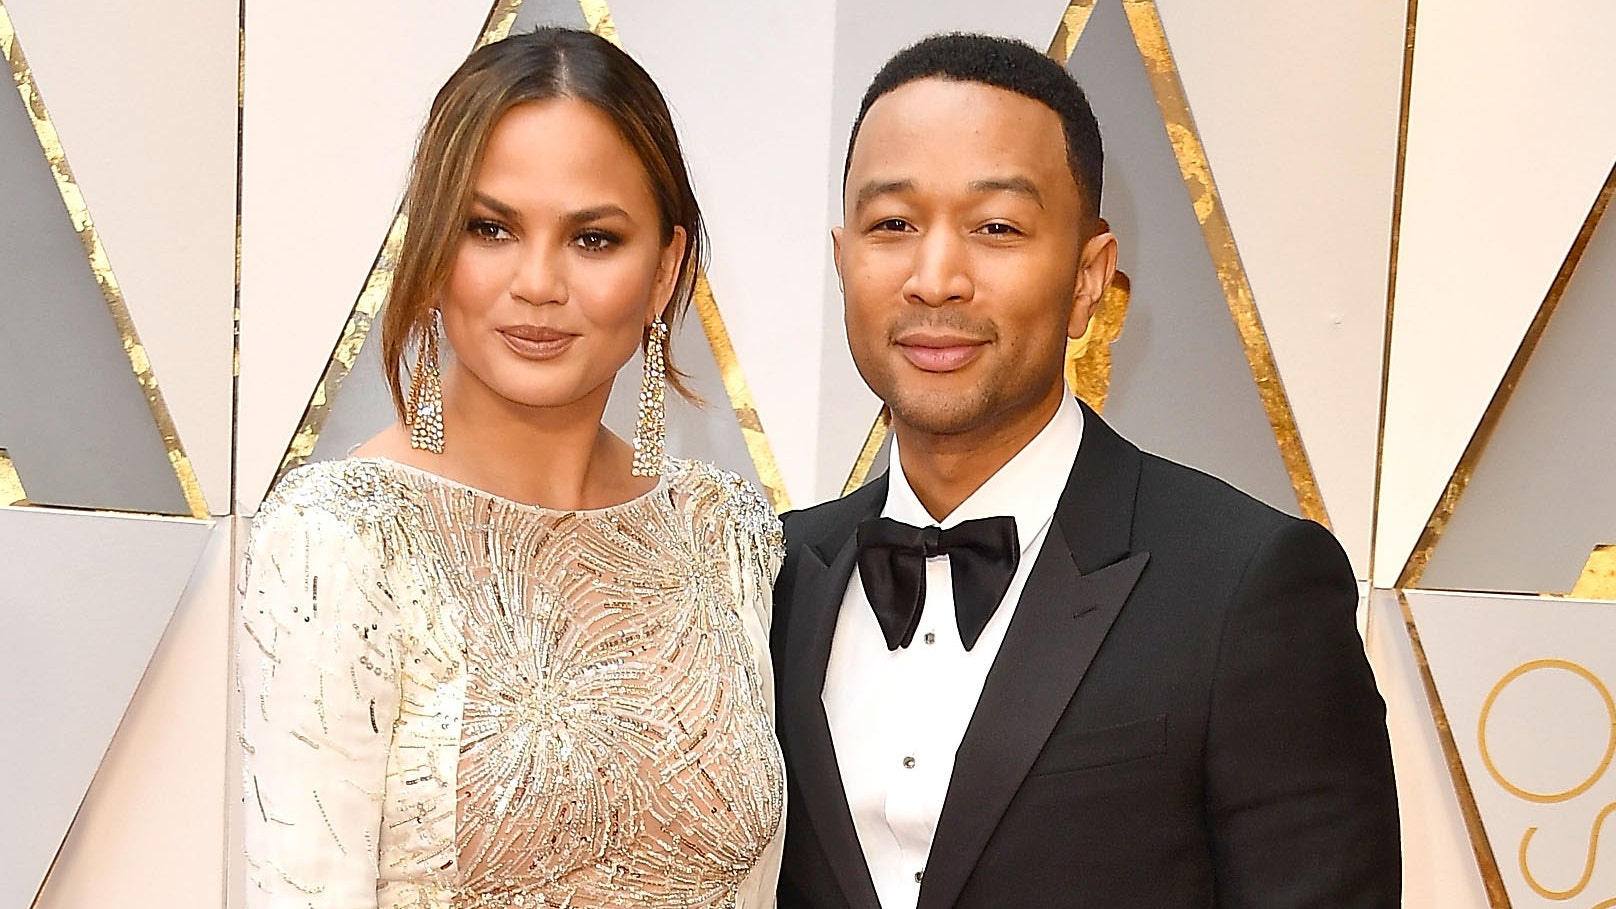 Chrissy Teigen says the ‘weirdest place’ where she and John Legend had intimate relationships was the DNC